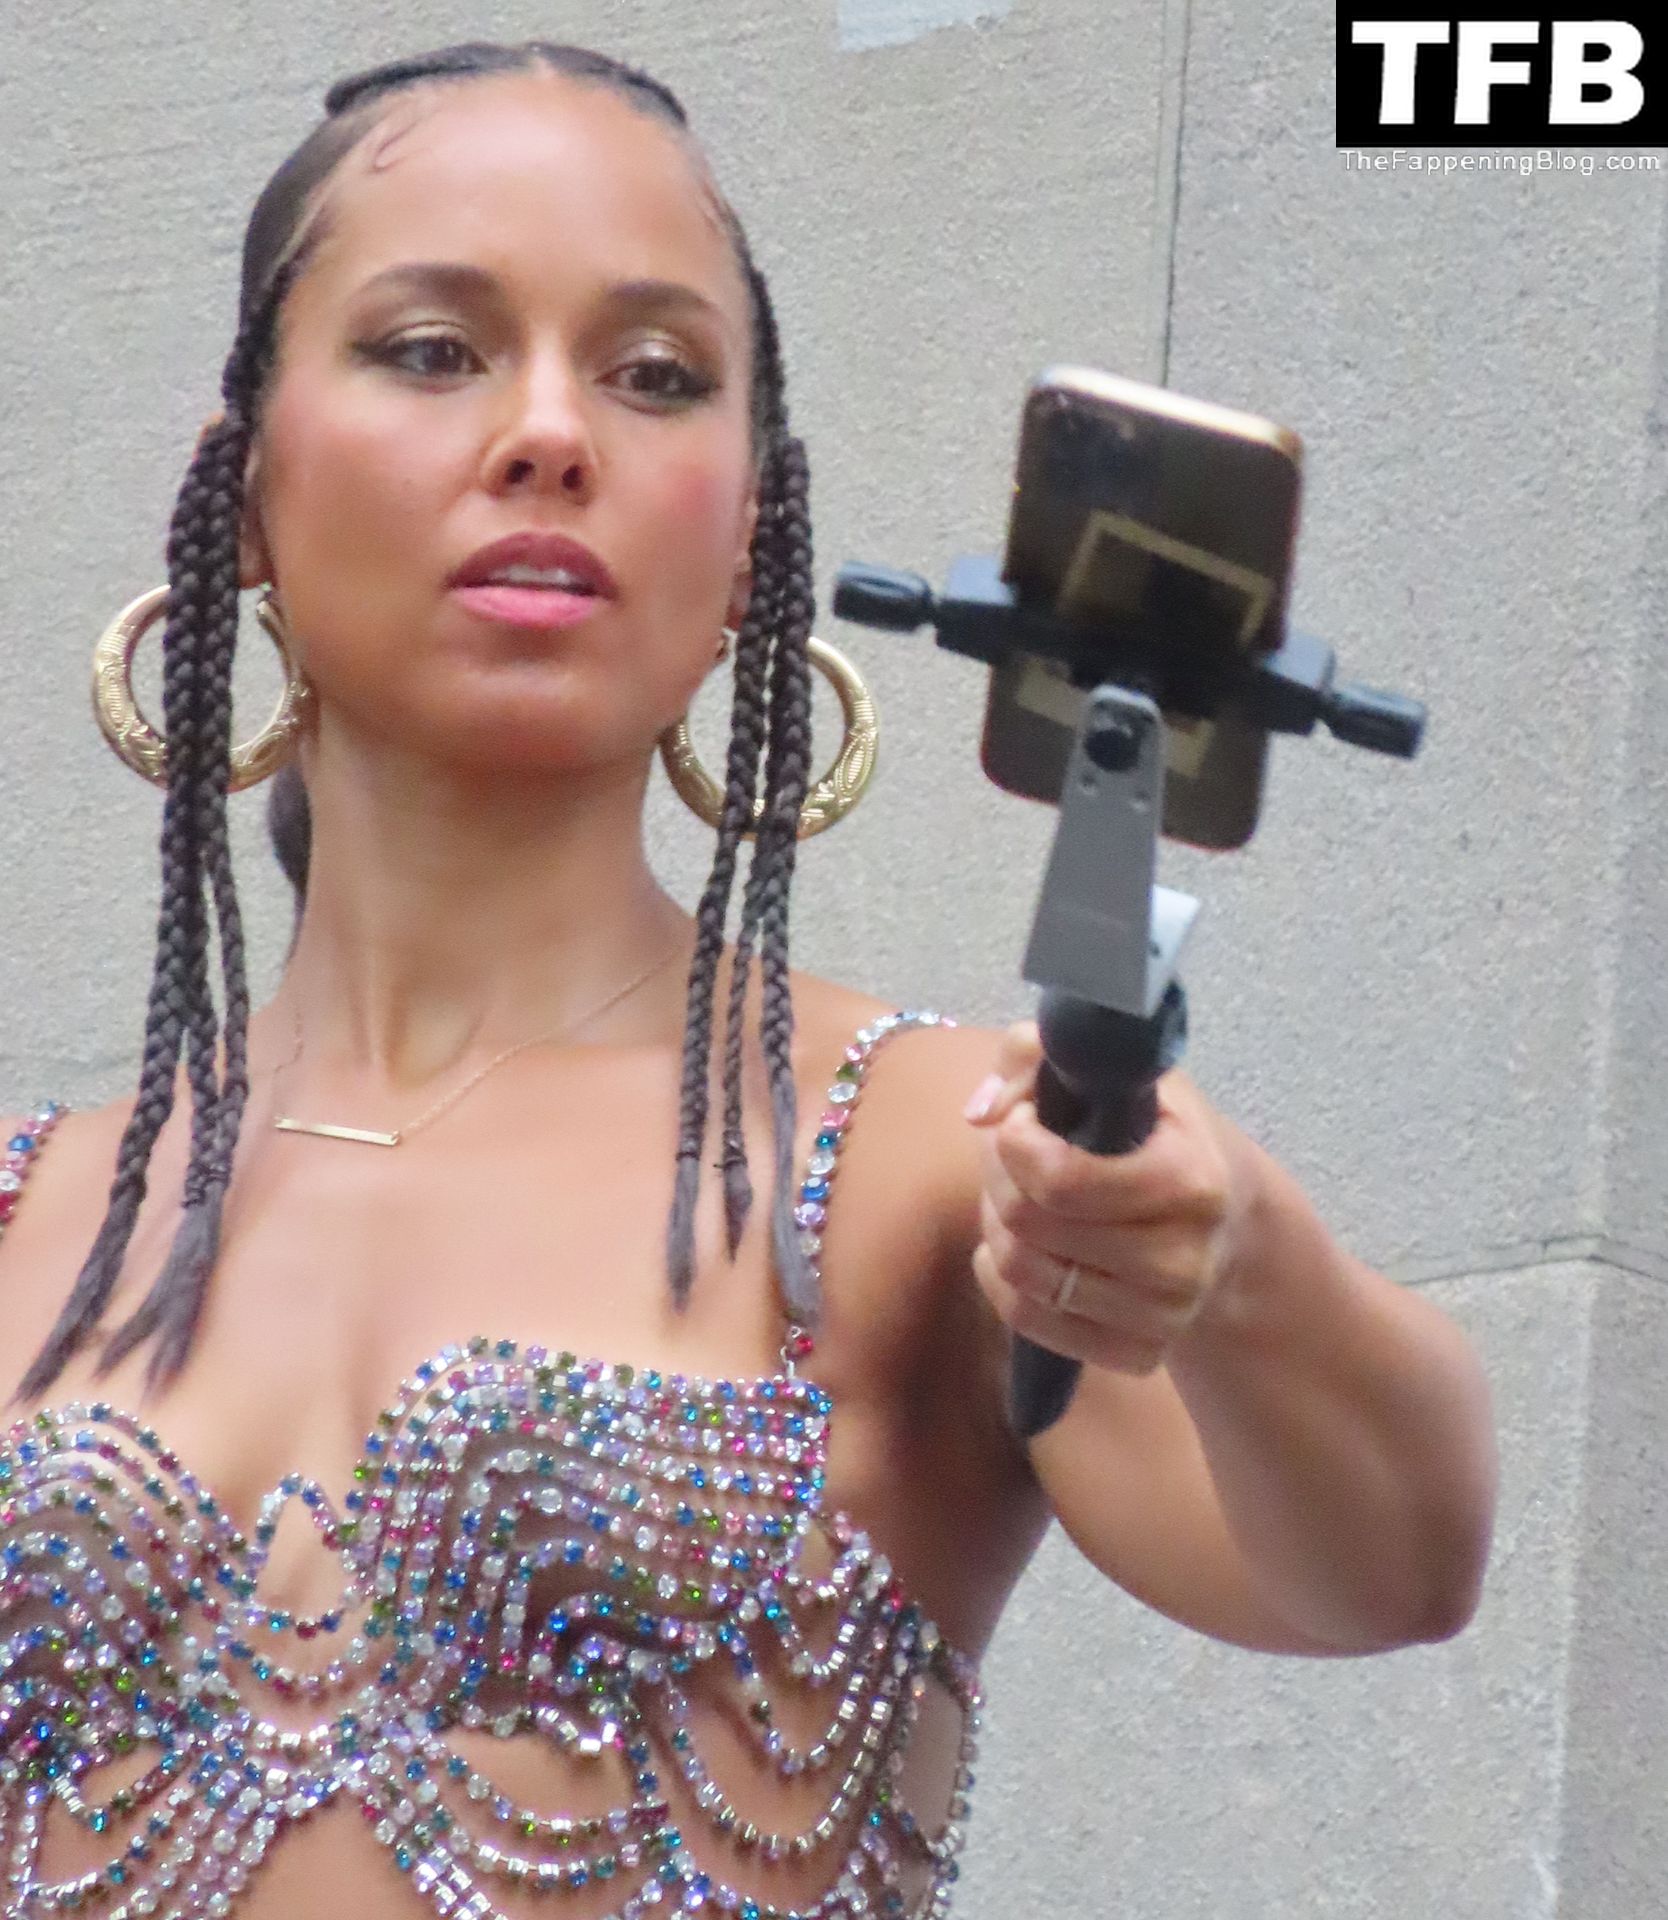 Alicia Keys Stops Traffic by Radio City During RC Rooftop Shoot in NYC (21 Photos)